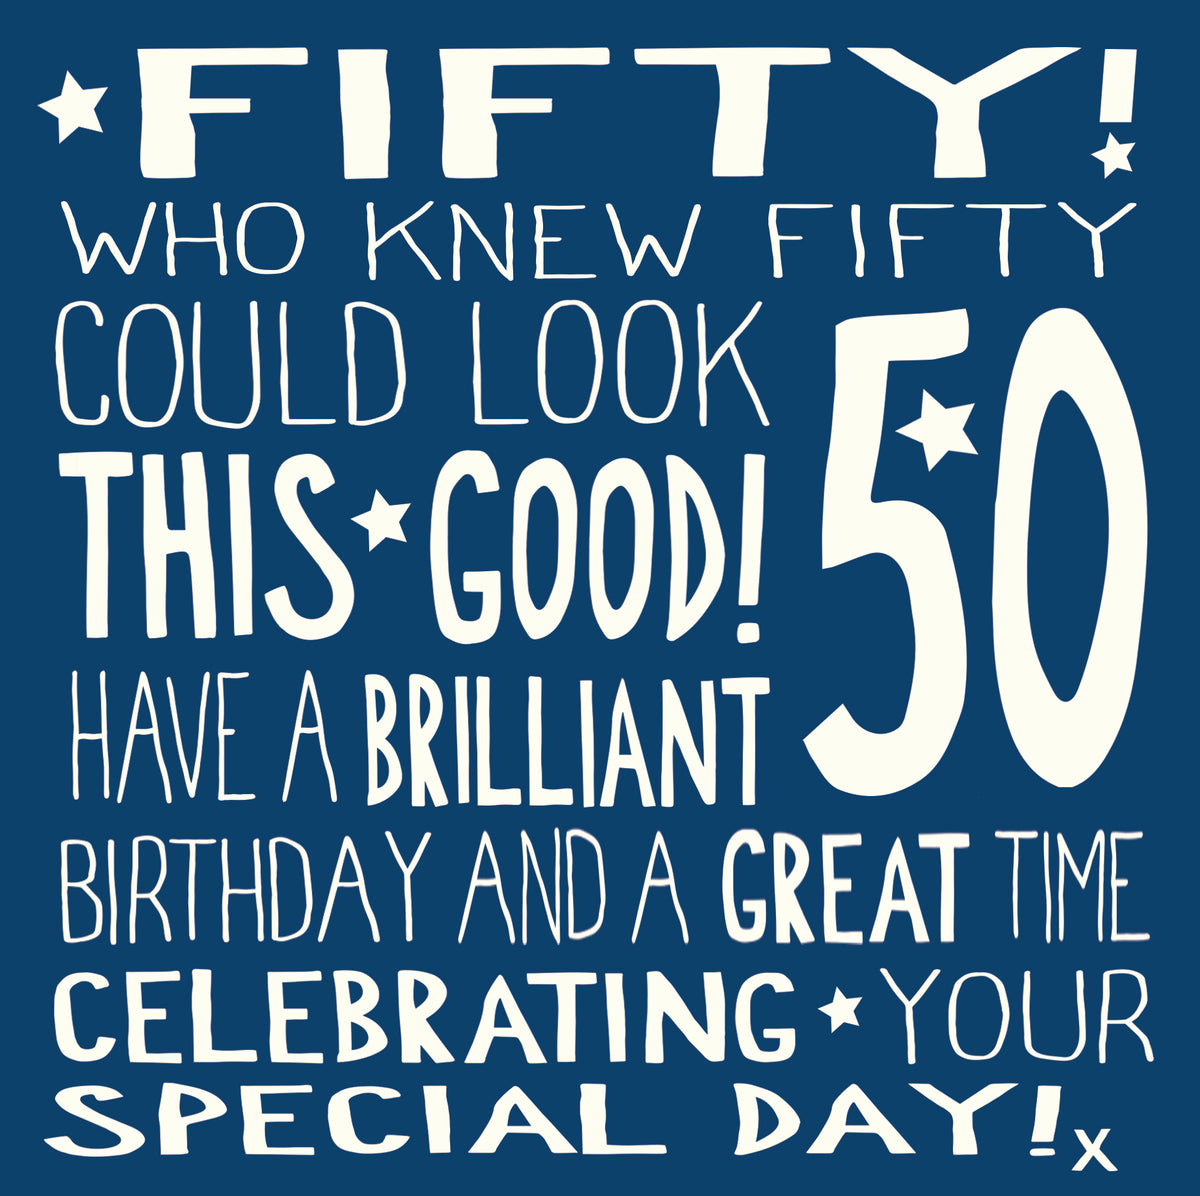 Who Knew 50 Could Look This Good Funny Birthday Card from Penny Black